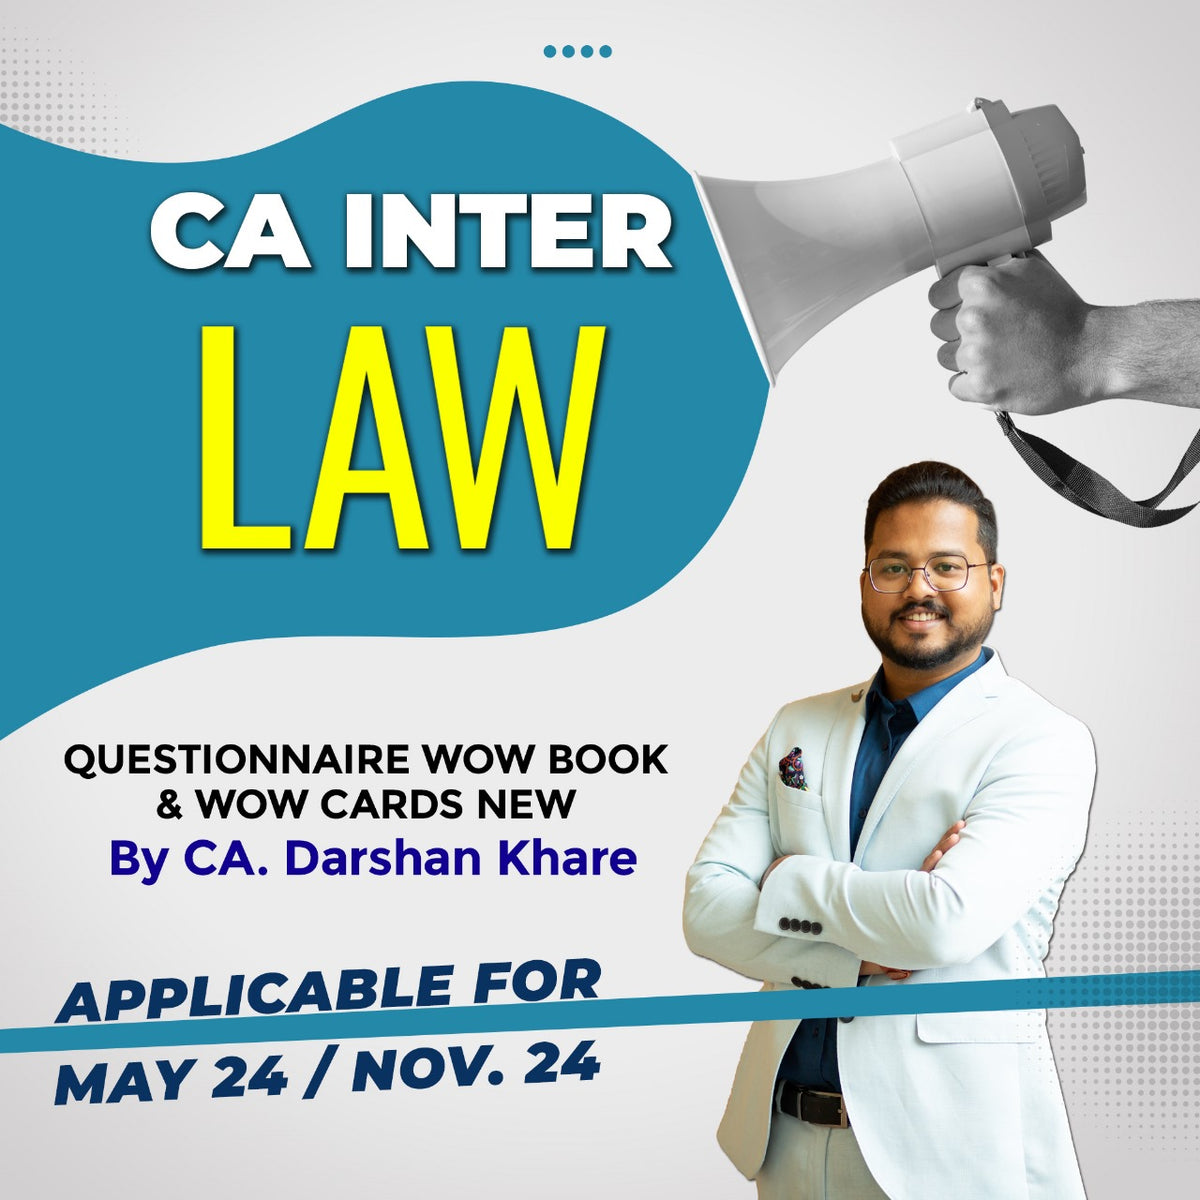 CA INTER LAW QUESTIONNAIRE, WOW BOOK AND WOW CARDS NEW - BY CA. DARSHAN KHARE